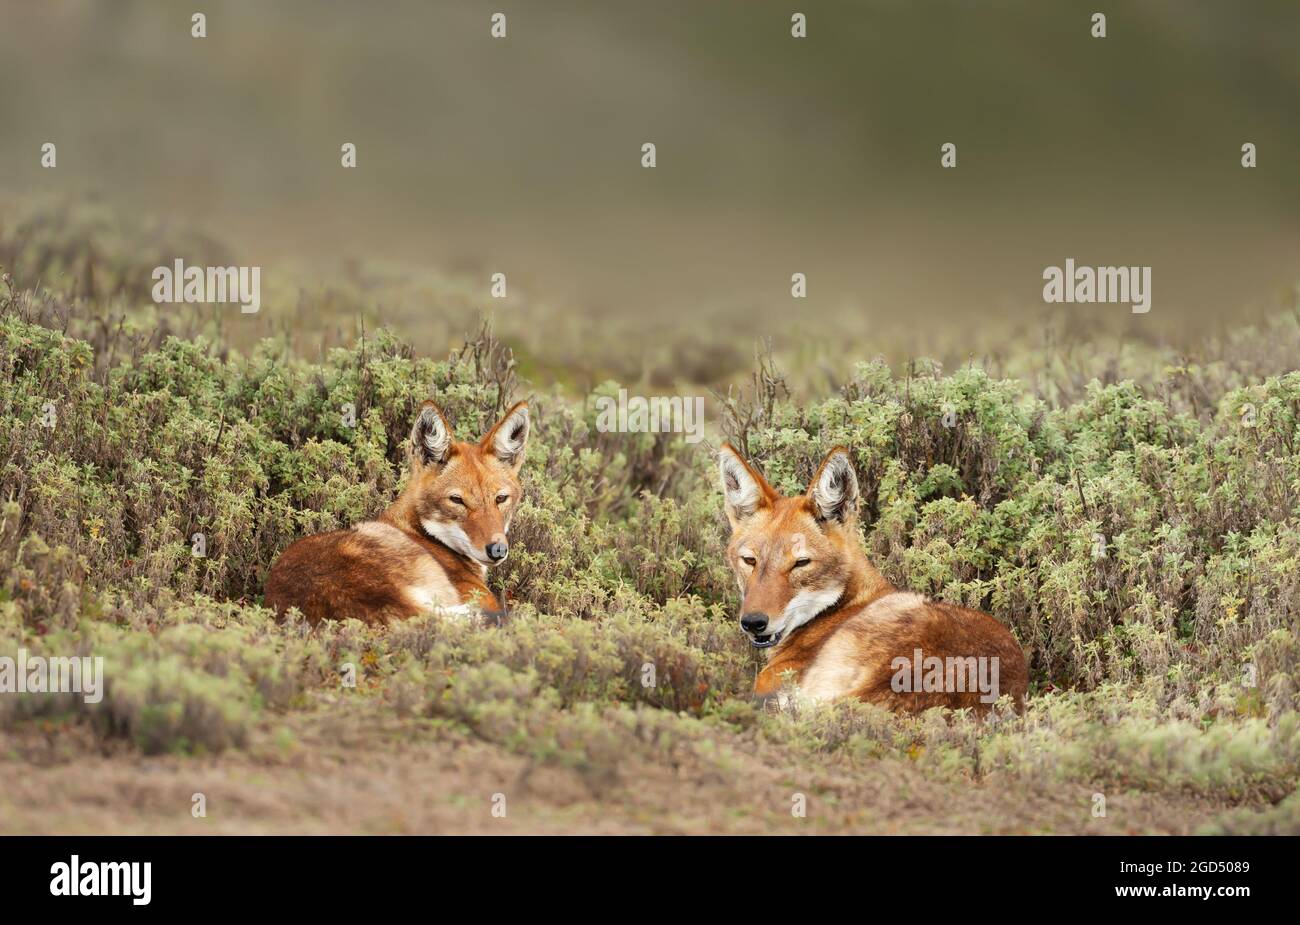 Close up of two rare and endangered Ethiopian wolves (Canis simensis) lying on grass, Bale mountains, Ethiopia. Stock Photo